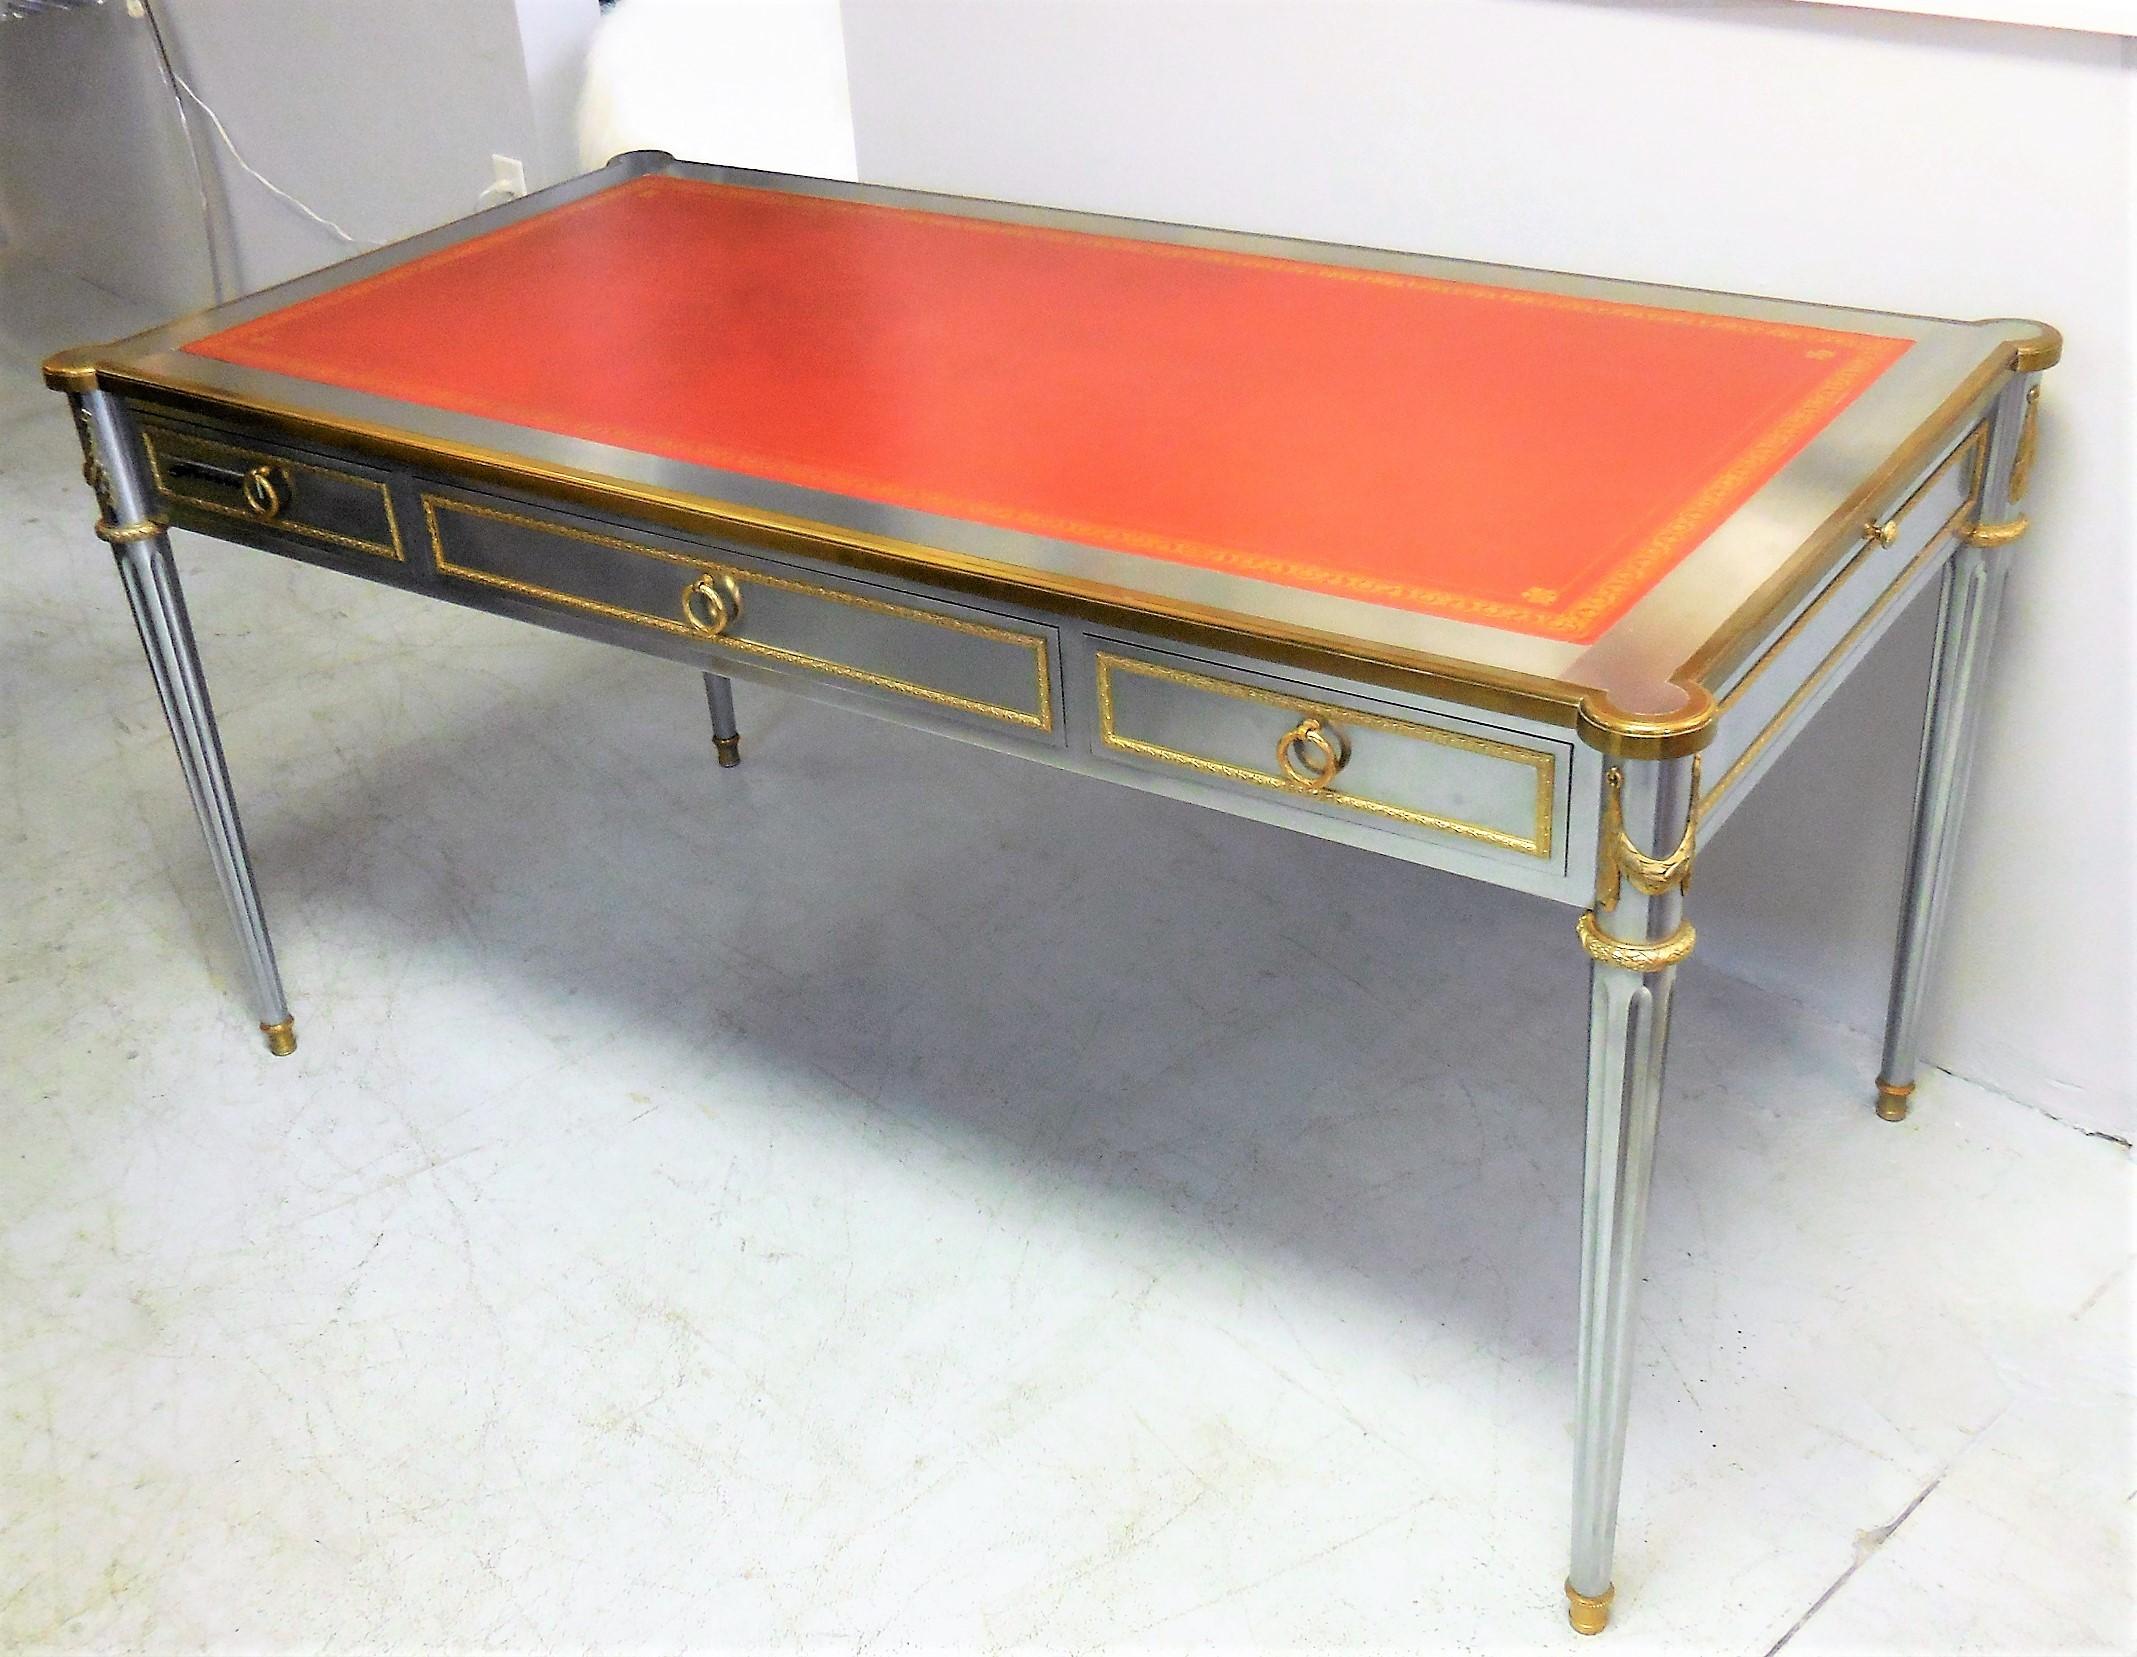 John Vesey V-60 Stainless Steel Bronze and Red Leather Desk, 1960s For Sale 8